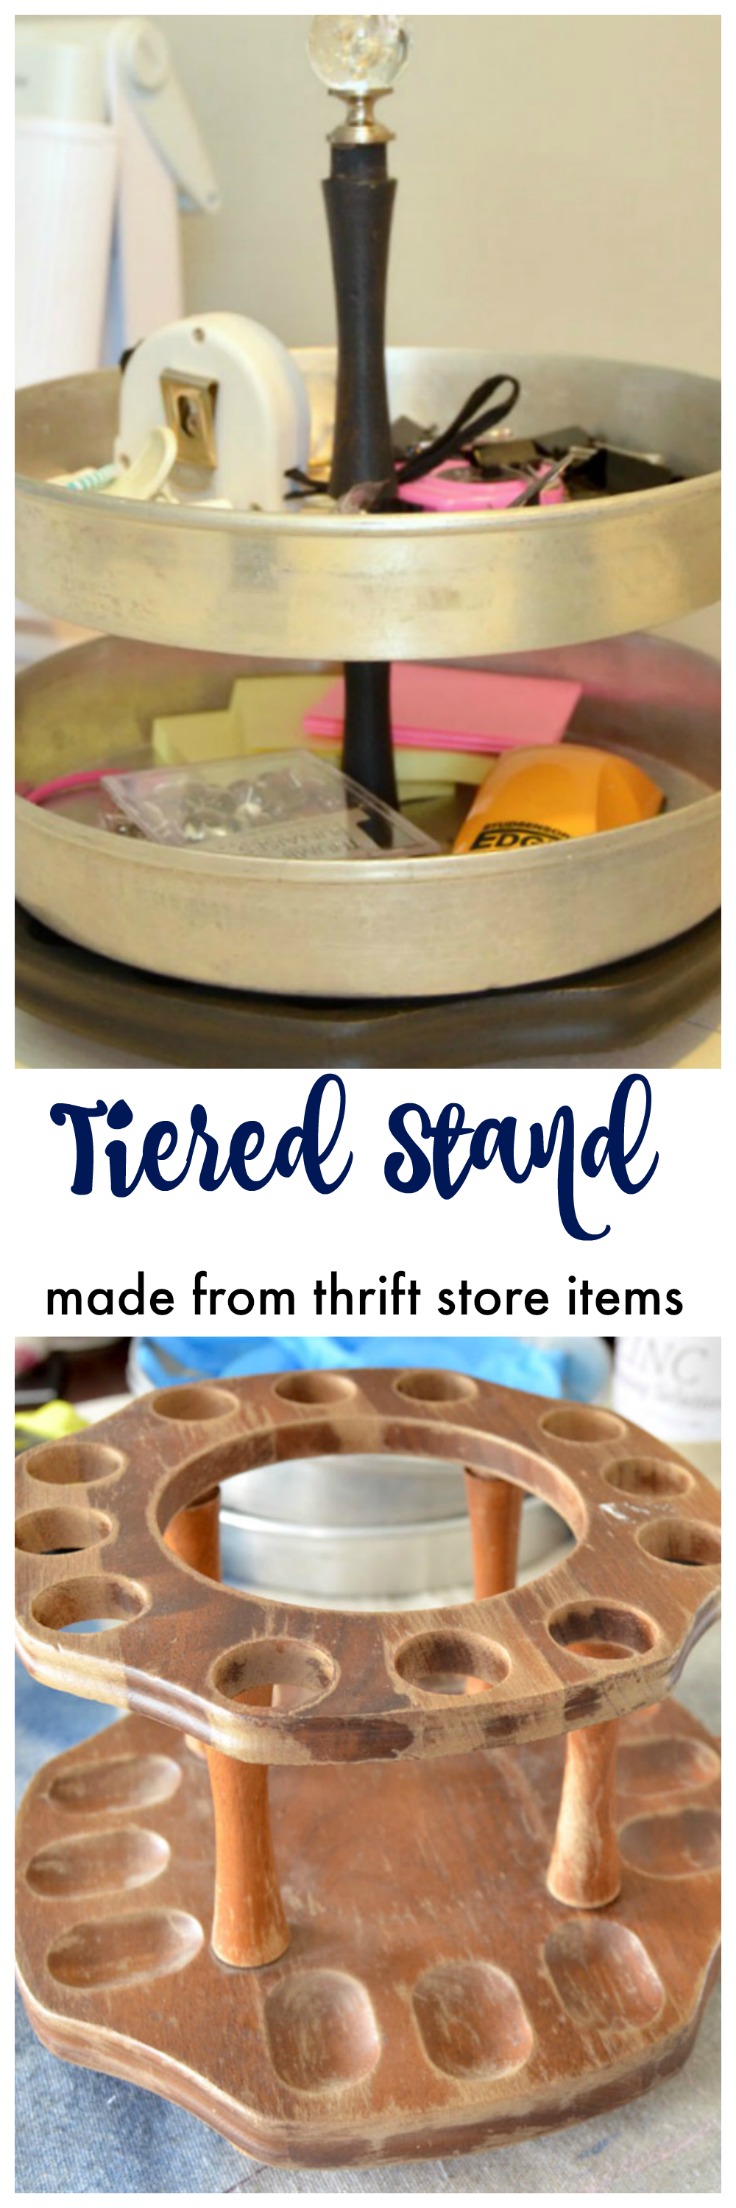 Tiered Stand Made From Thrift Store Items